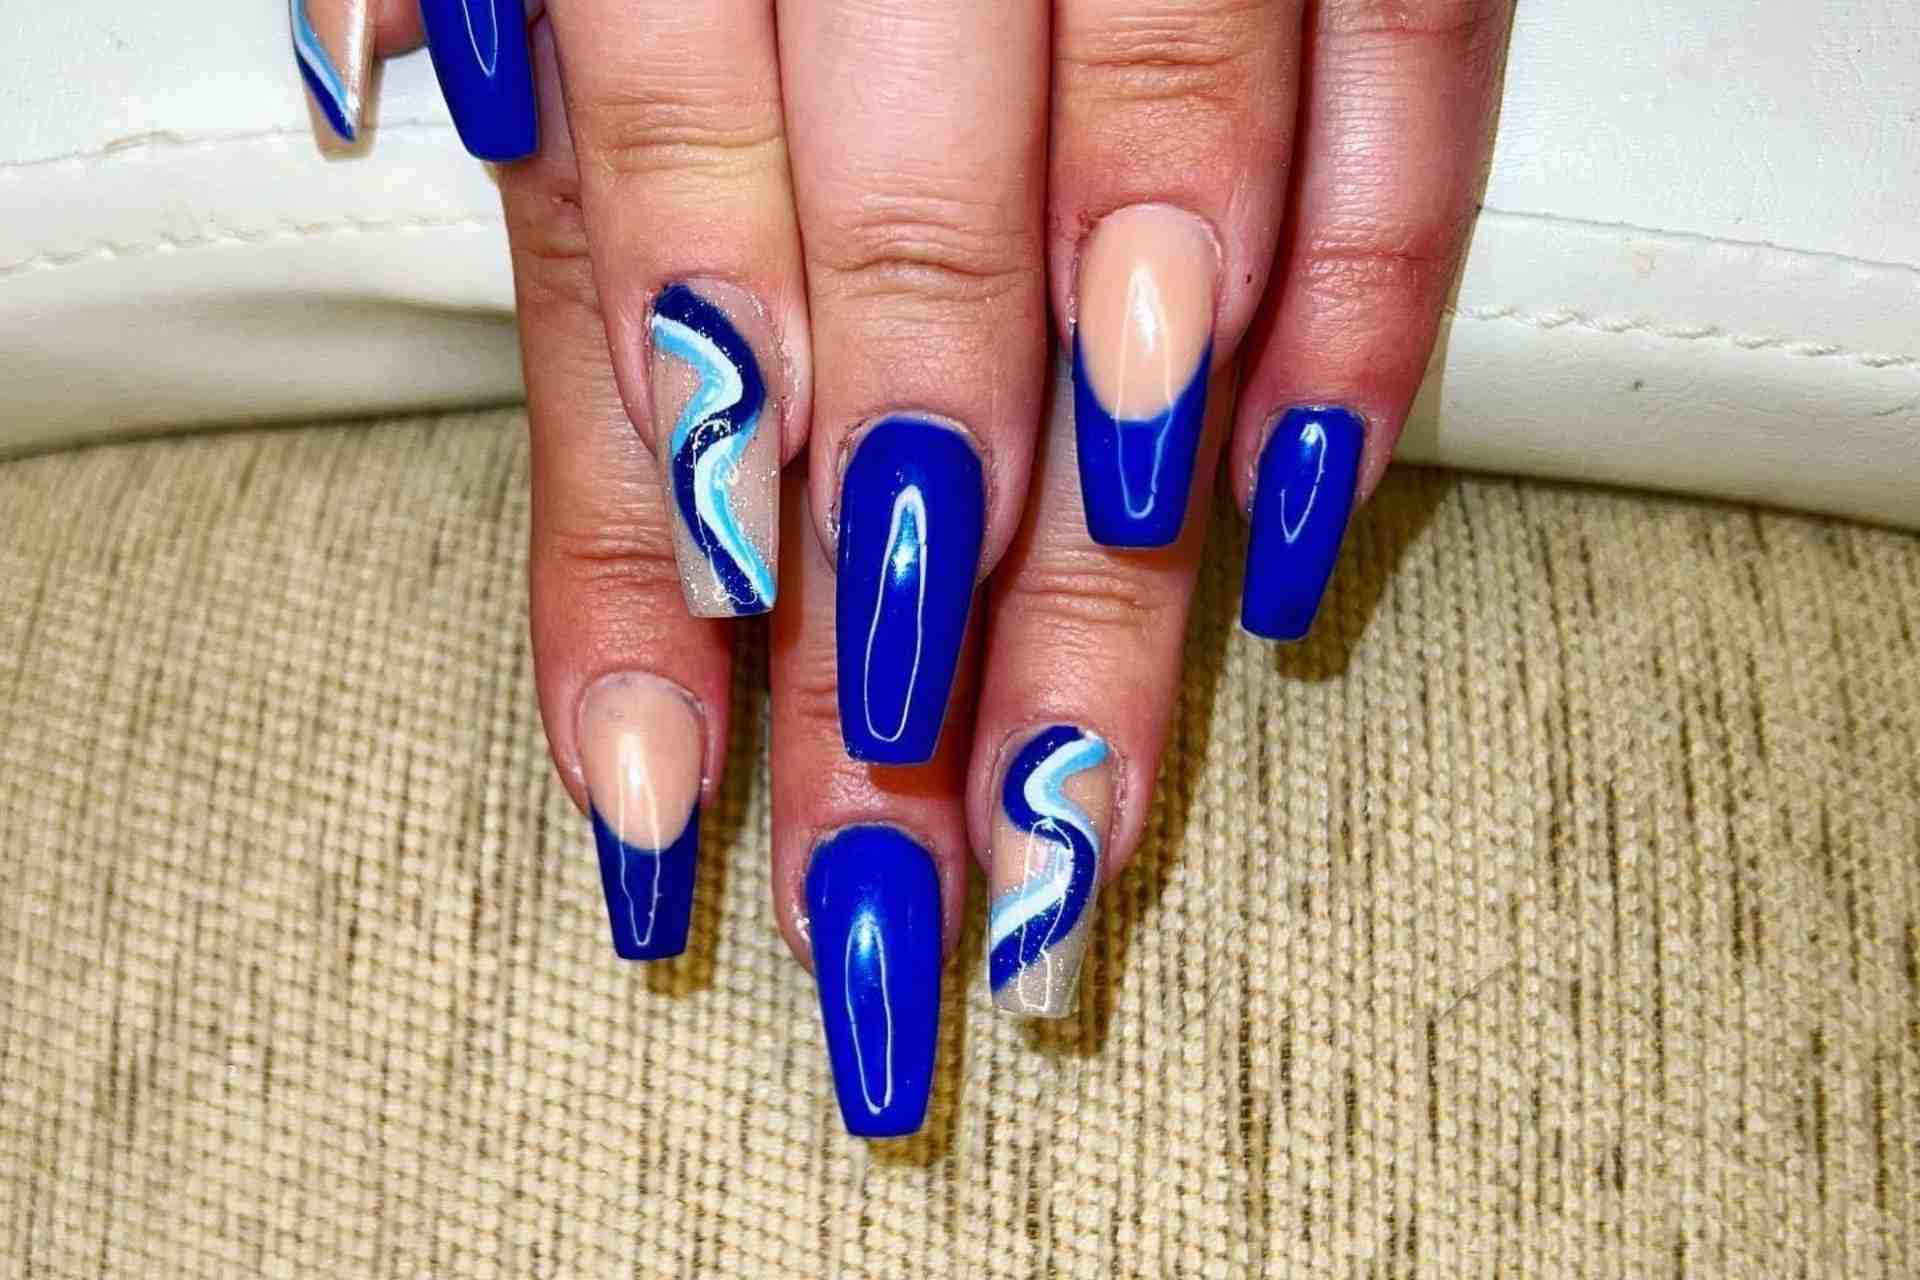 Nails by Alysia